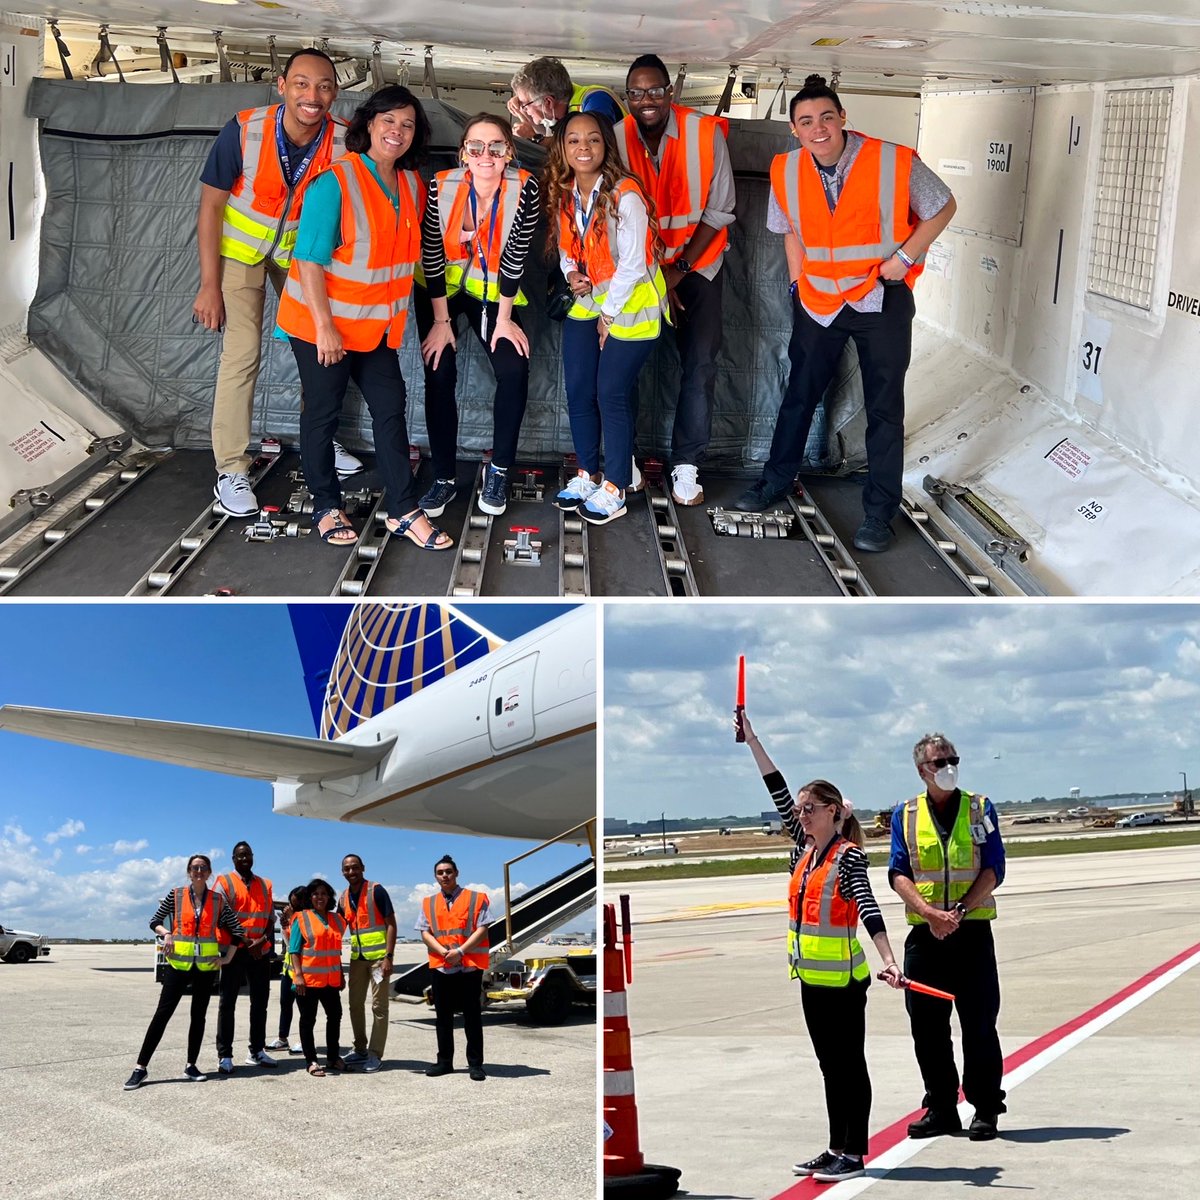 Beautiful day at ORD to give our new recruiting representatives a tour of the ramp! ⁦@Toddhavel11⁩ ⁦@OmarIdris707⁩ ⁦@HermesPinedaUA⁩ ⁦@JulieAs76920130⁩ ⁦@mtmorais28⁩